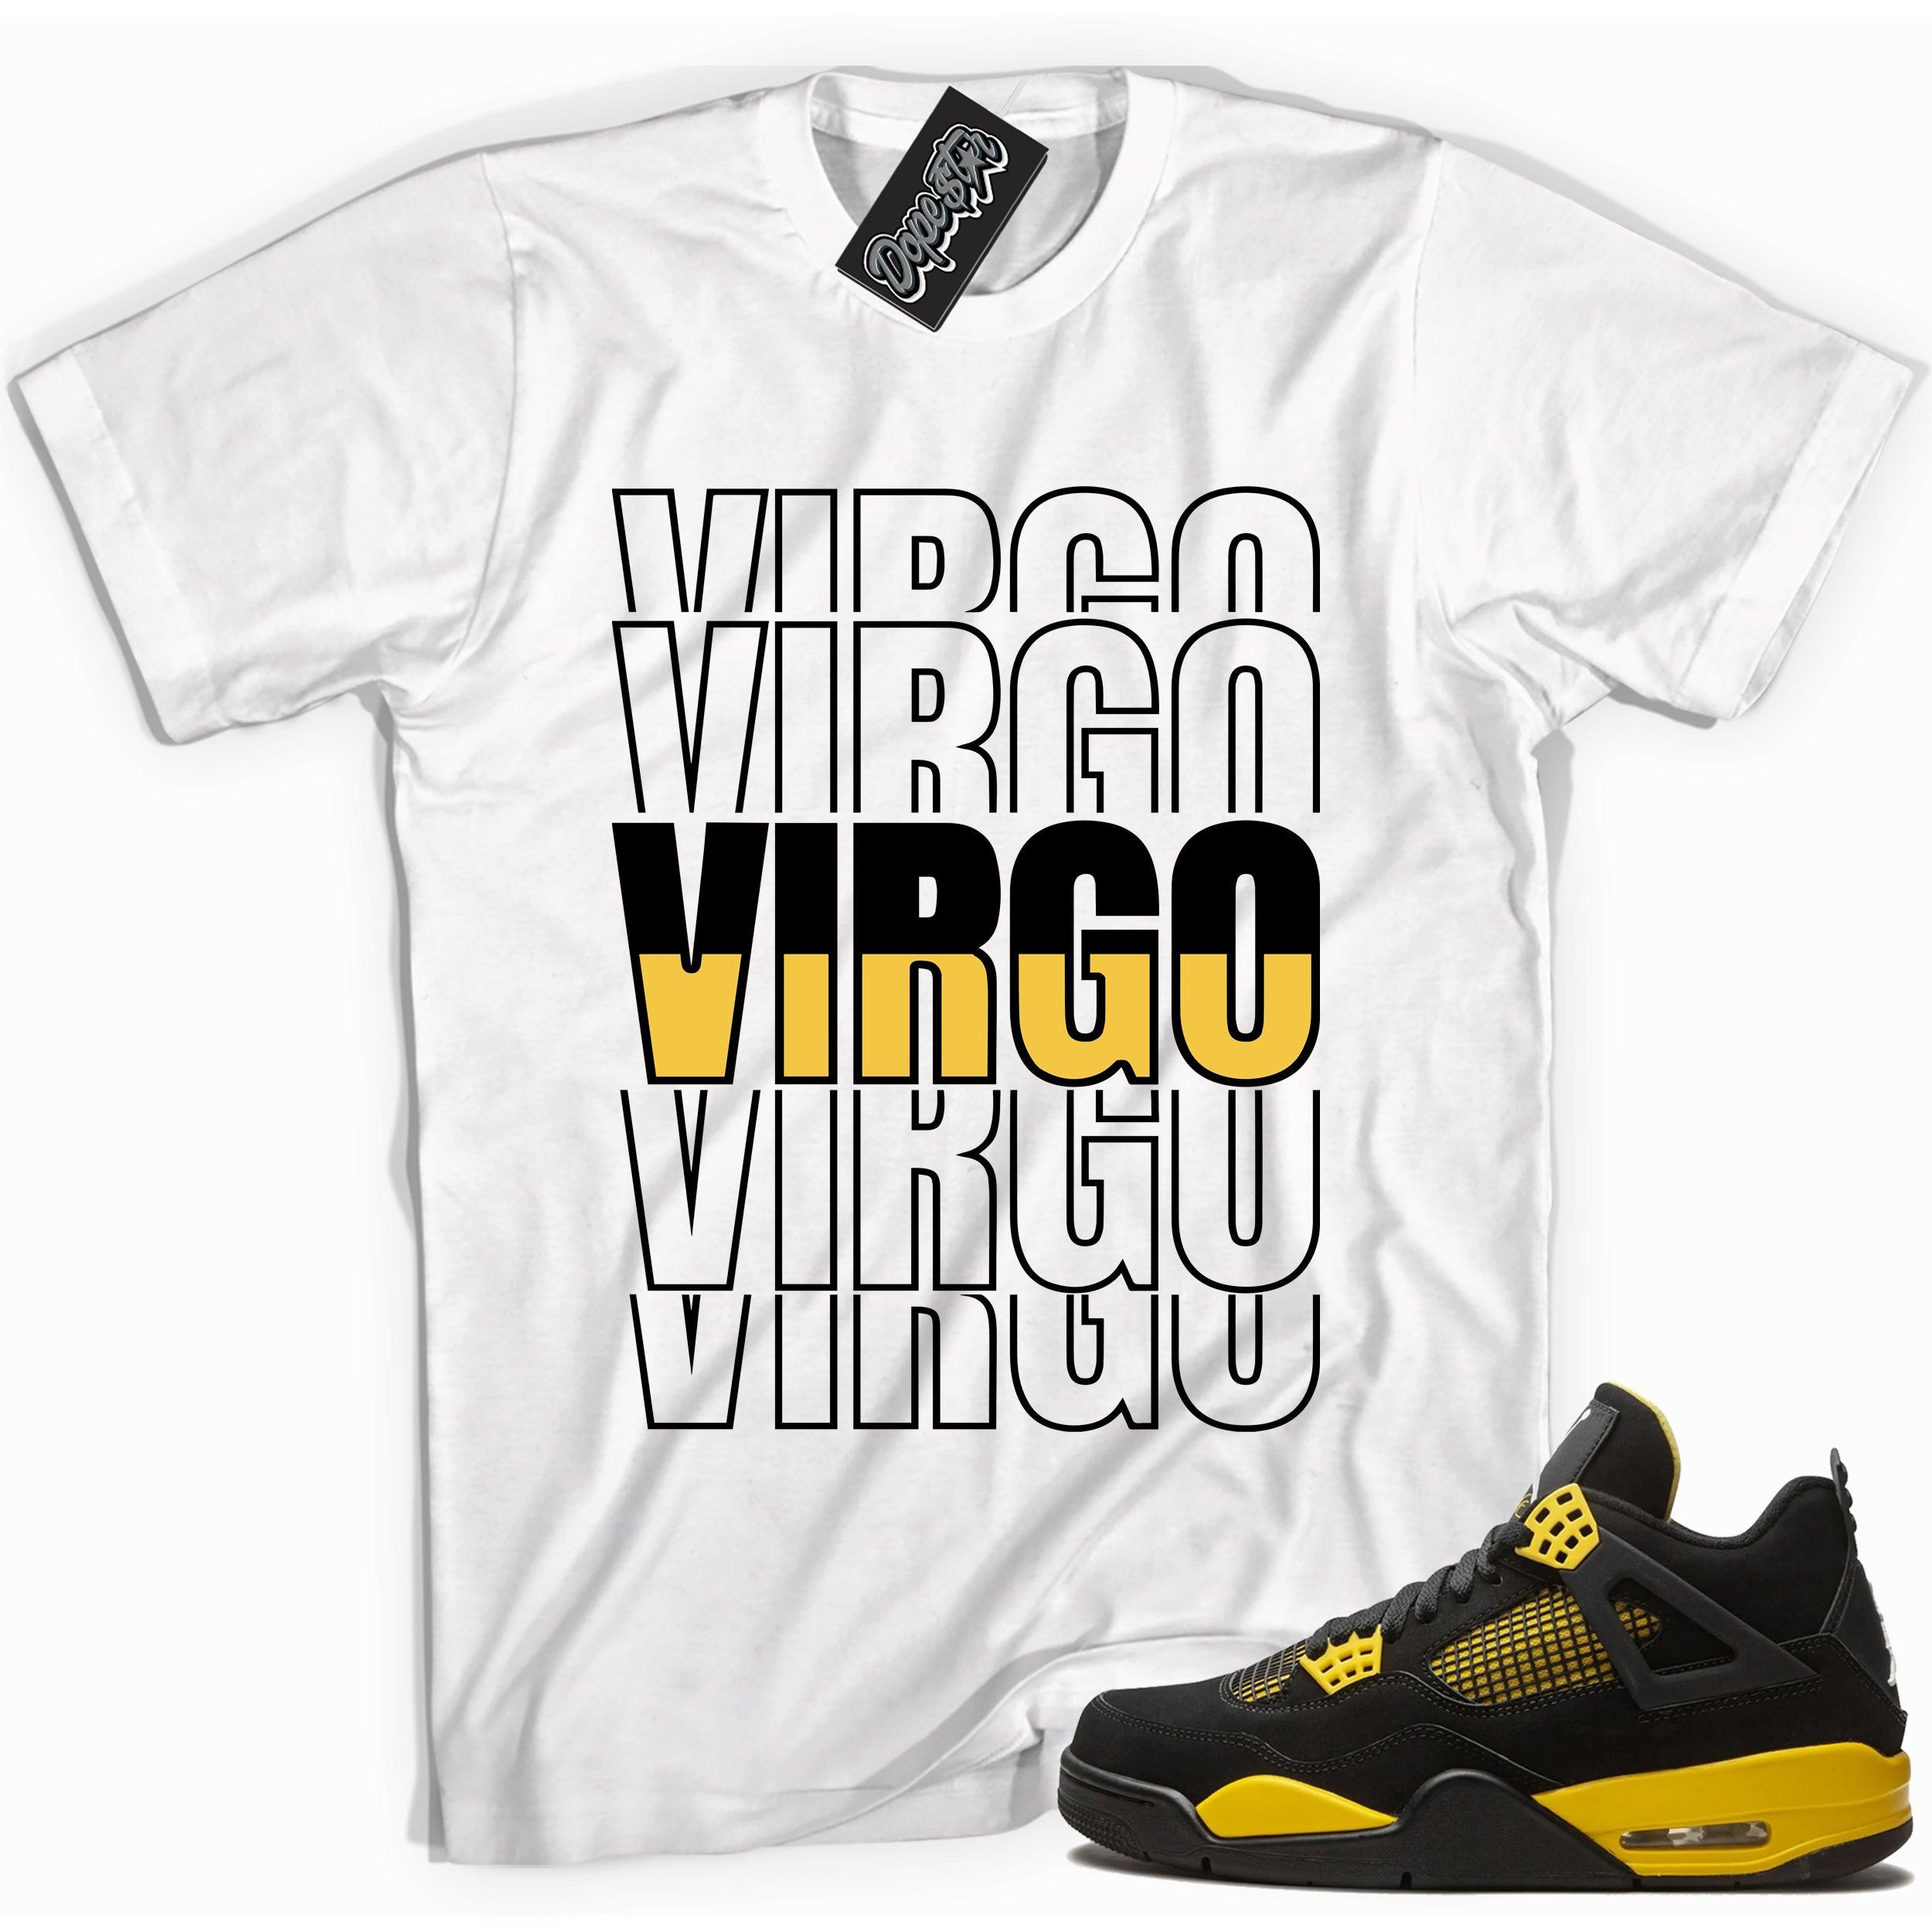 Cool white graphic tee with 'virgo' print, that perfectly matches Air Jordan 4 Thunder sneakers